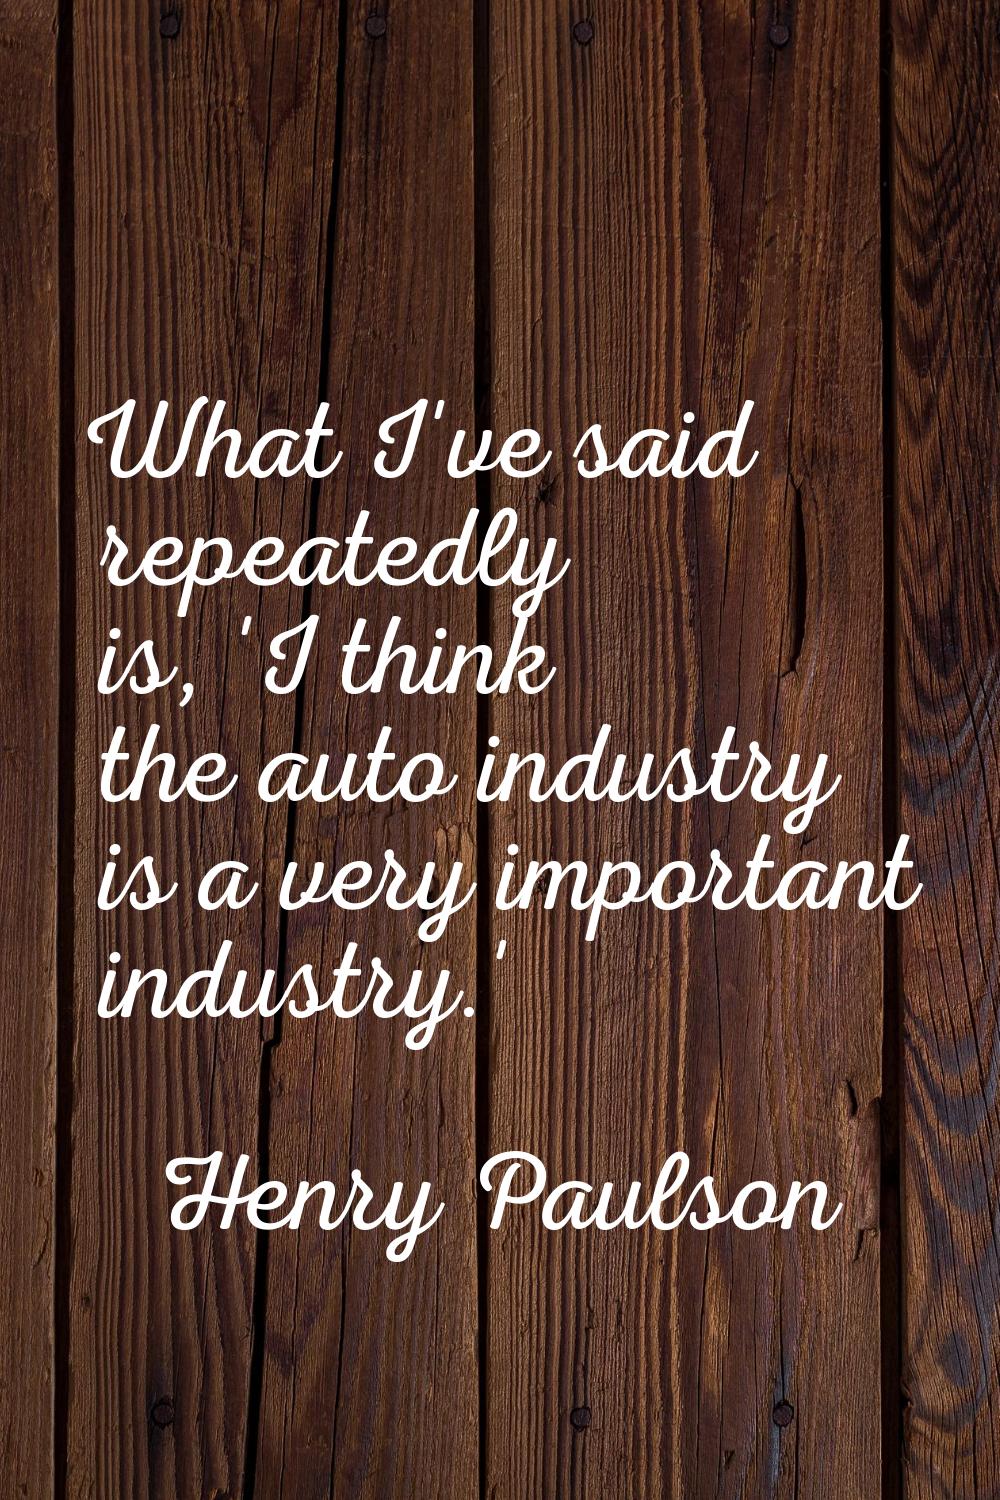 What I've said repeatedly is, 'I think the auto industry is a very important industry.'